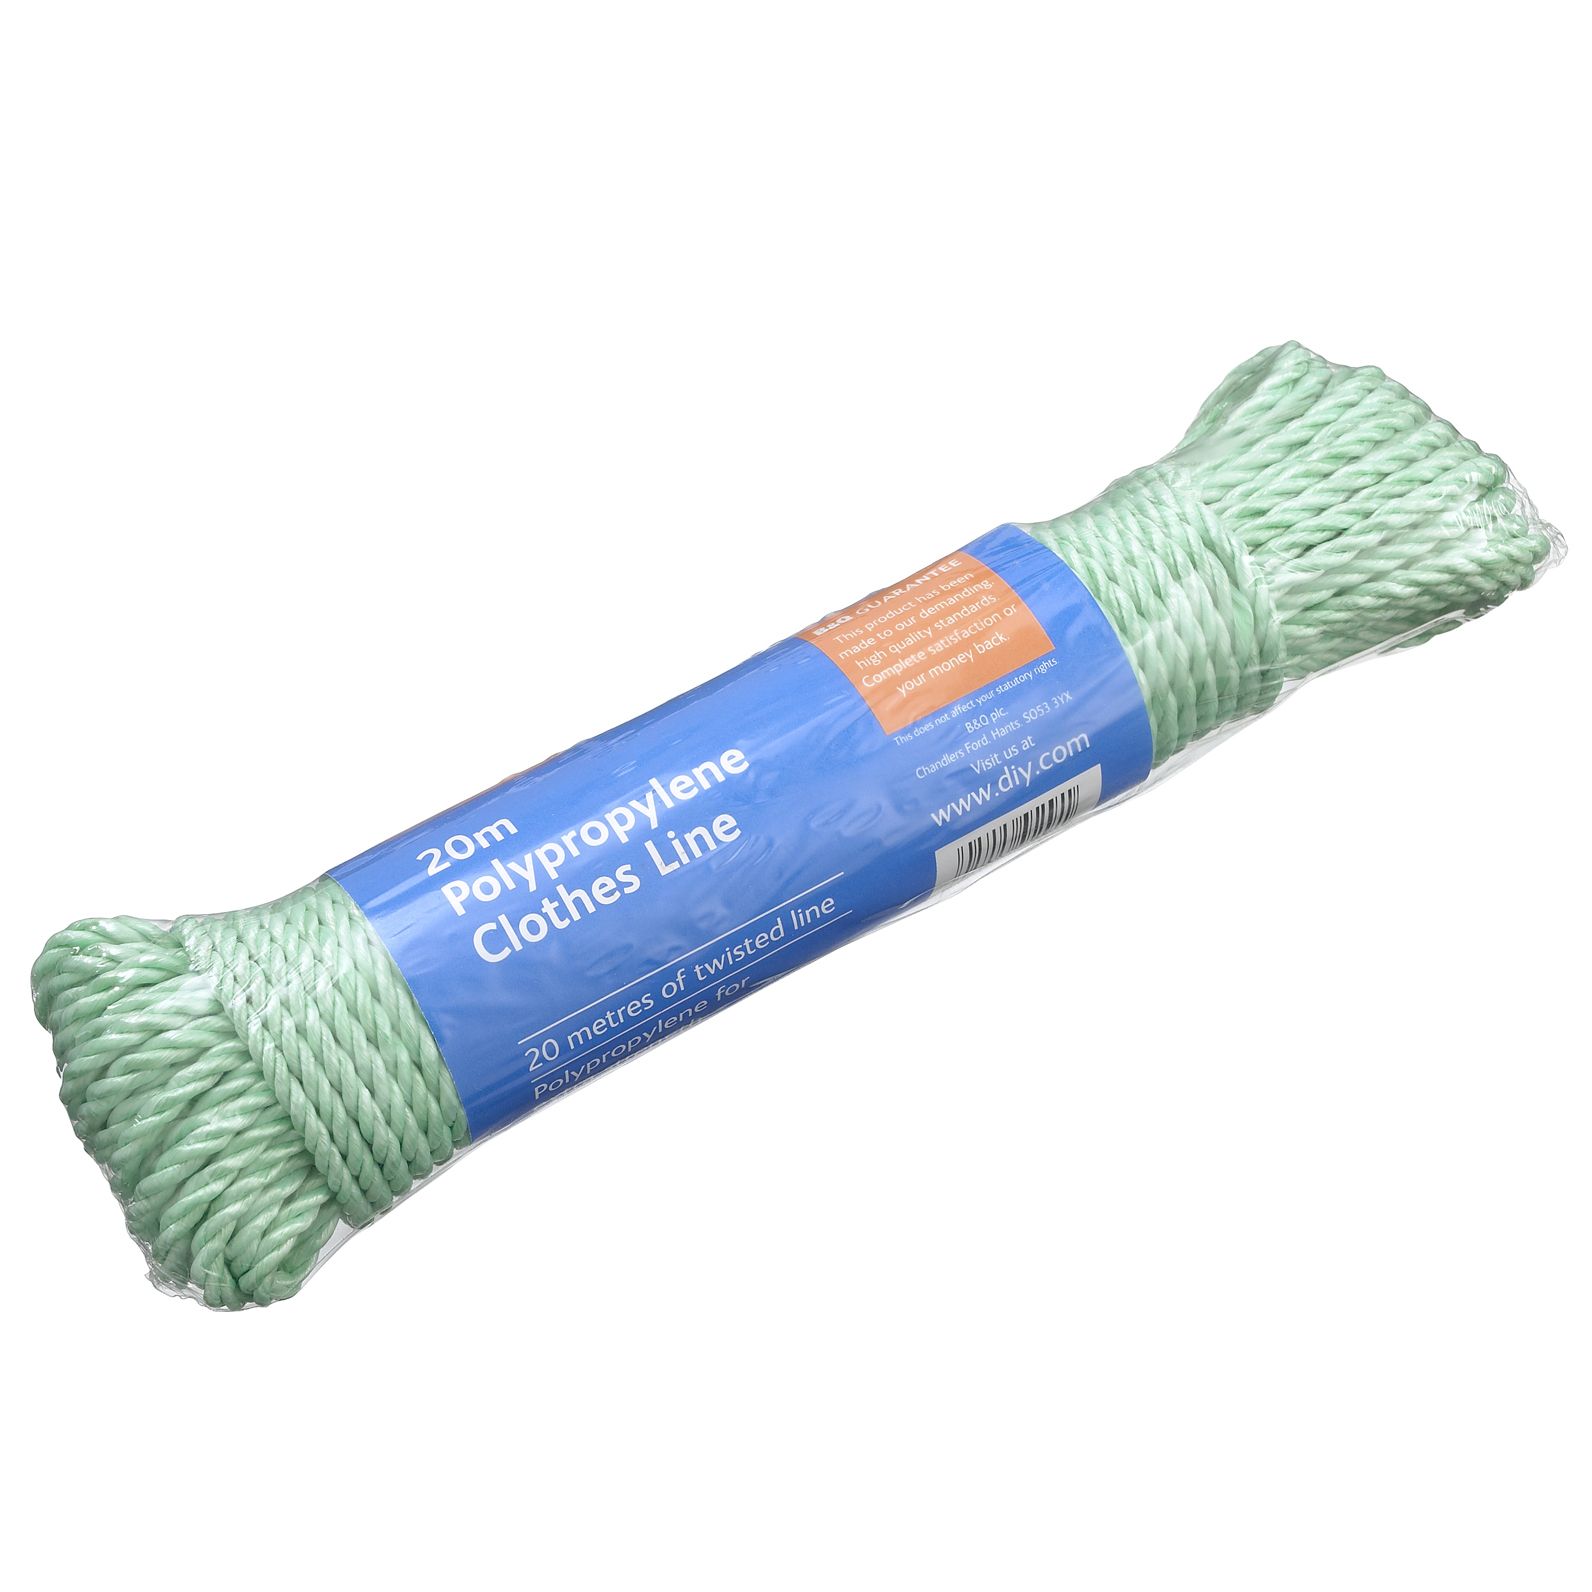 Clothes Line Heavy Duty PVC Coated 20 Meters Long Steel Core Washing Rope  Plastic Clothesline String Perfect For Outside Garden Crafts Arts Camping